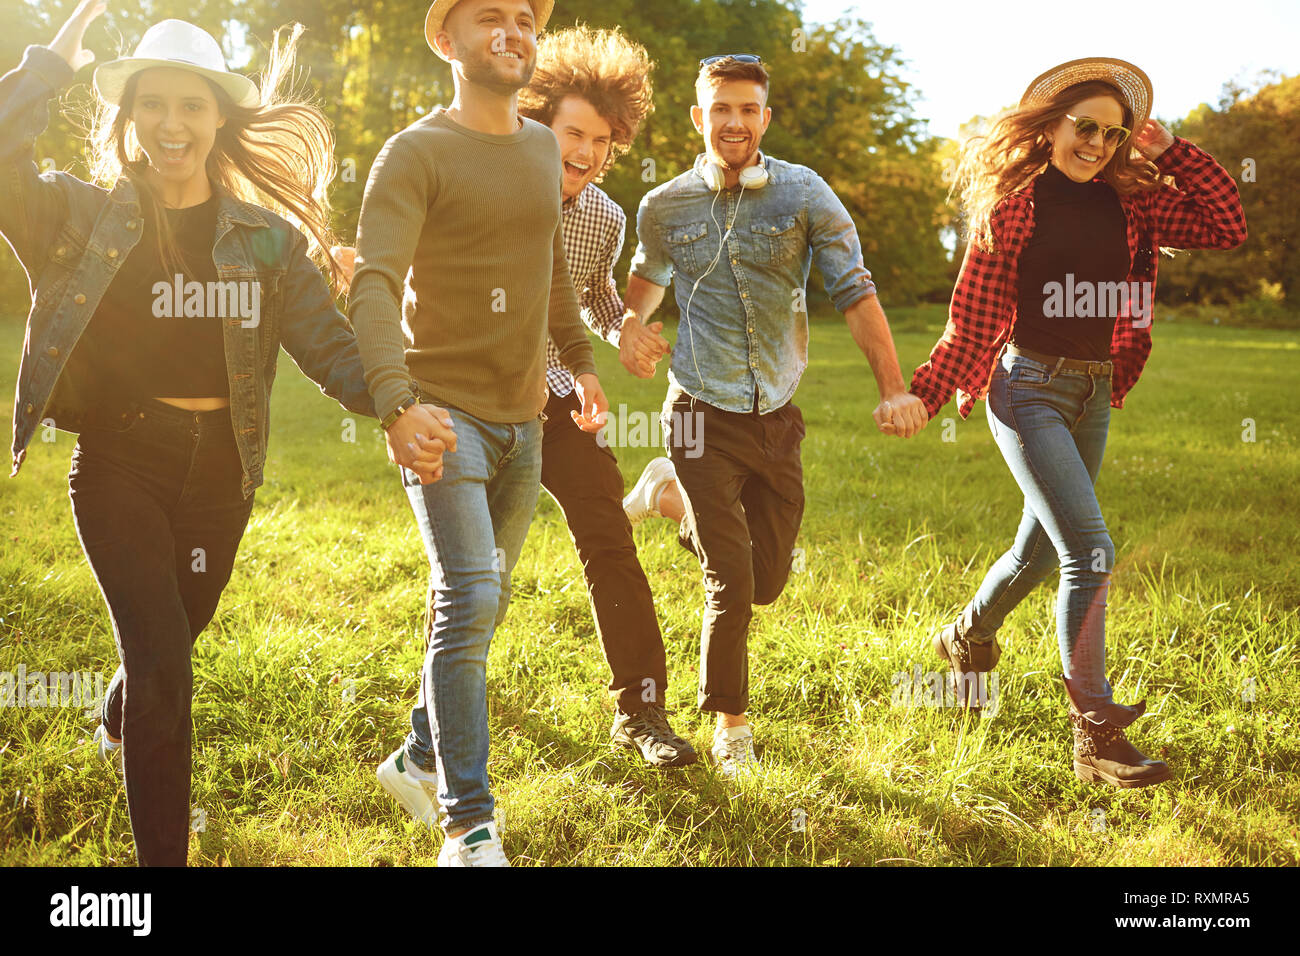 Cheerful friends are running in the park. Stock Photo